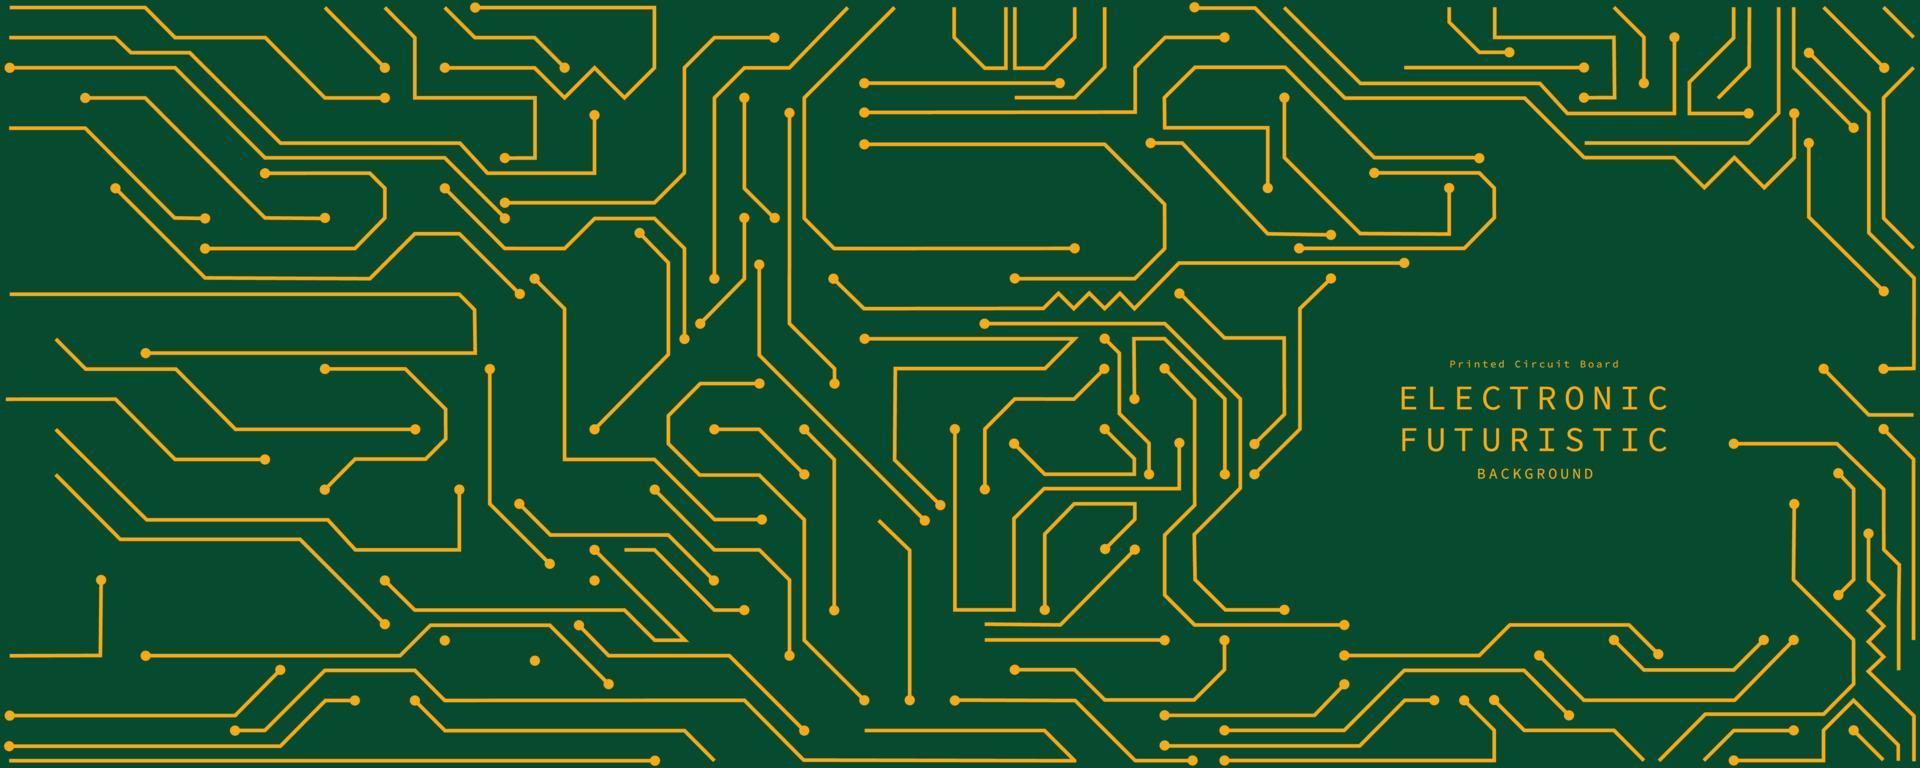 A printed circuit board for abstract futuristic digital background design vector